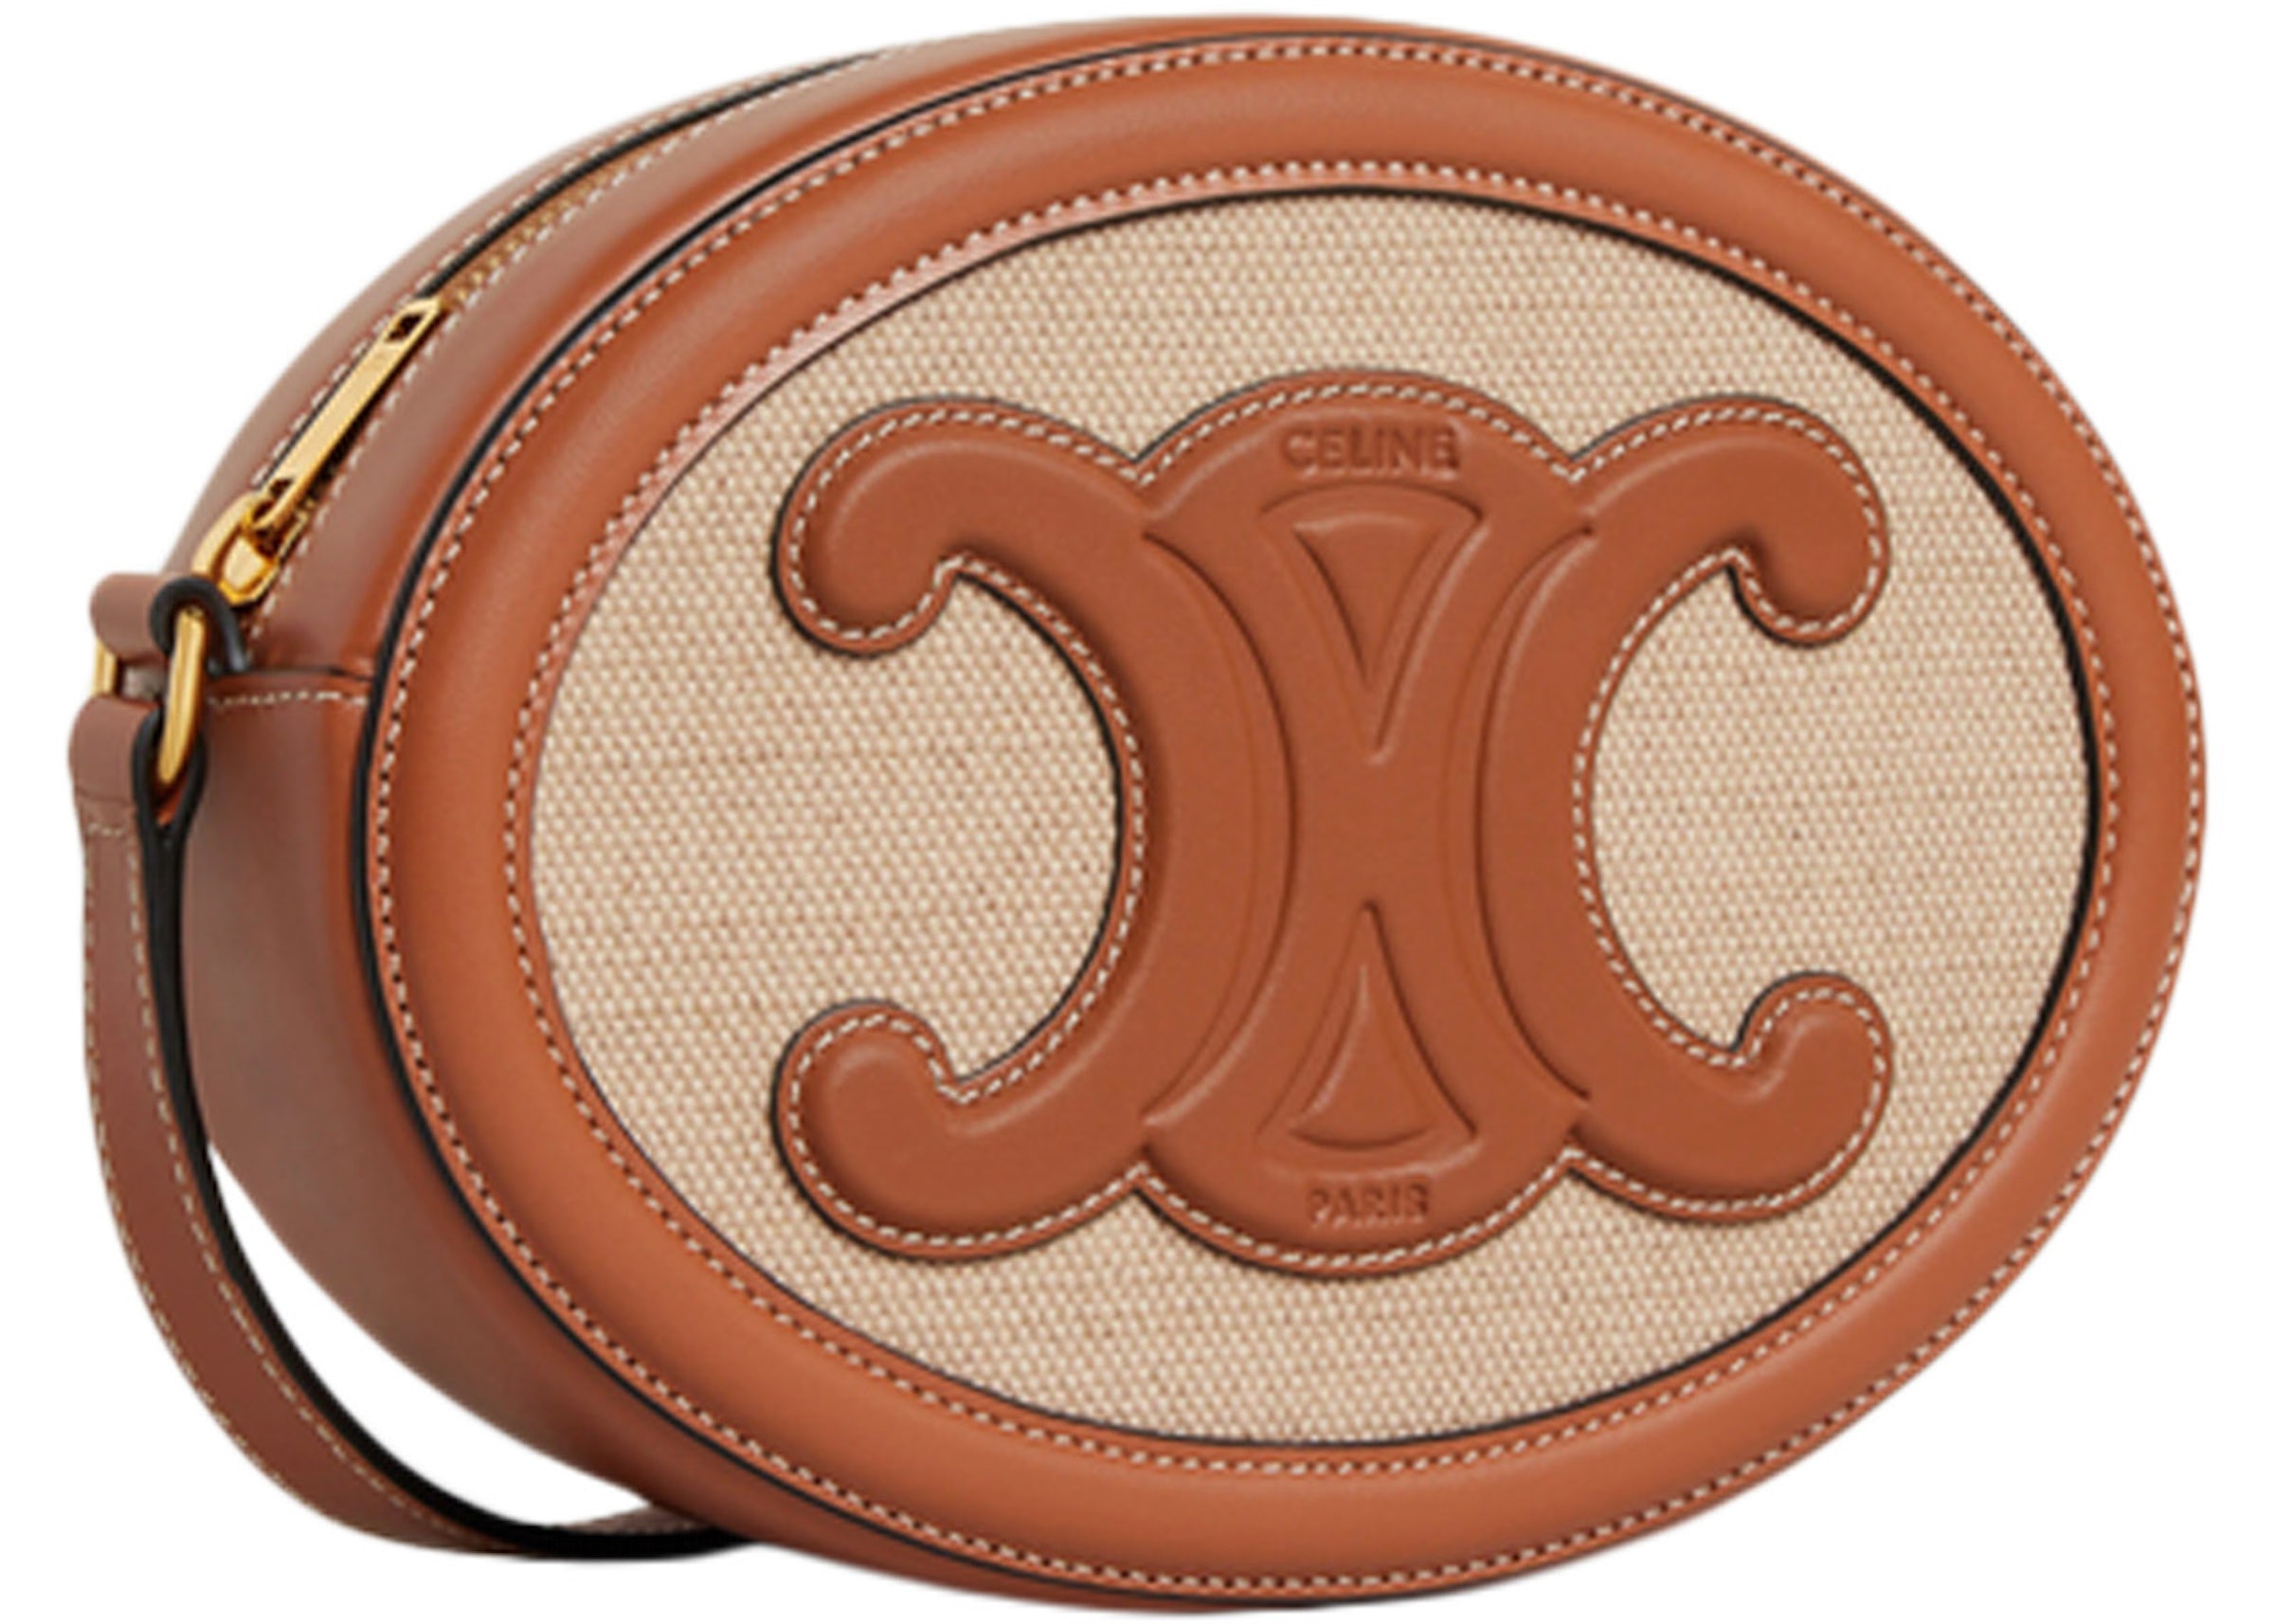 Celine Crossbody Oval Cuir Purse Triomphe Embroidery Natural/Tan